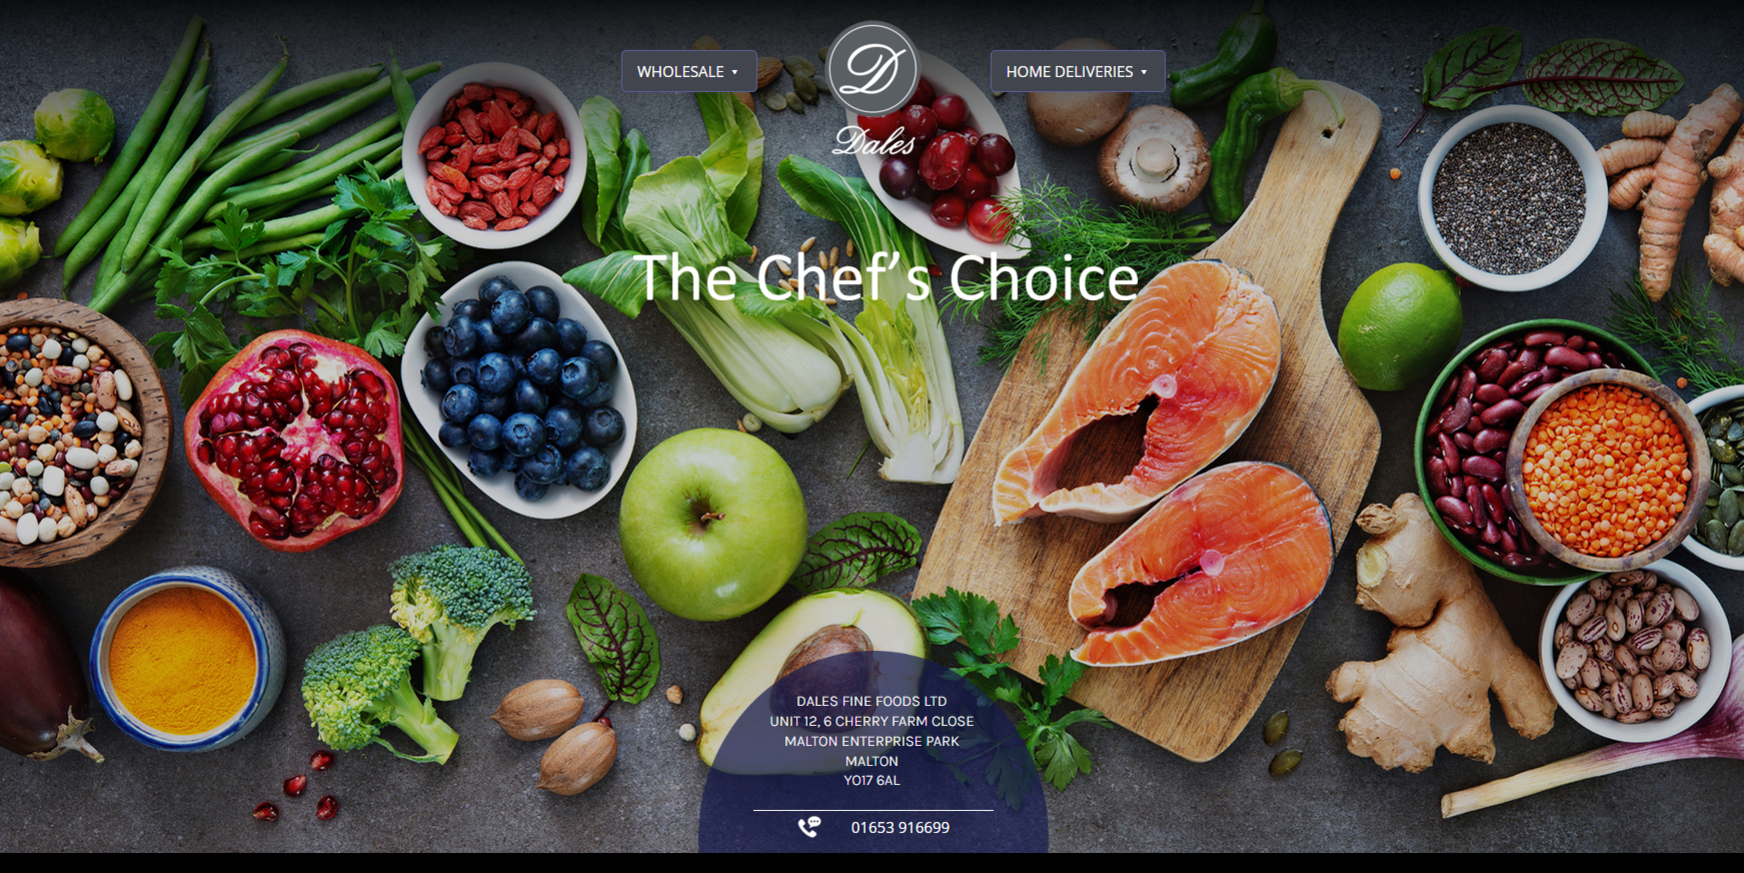 The new updated Chef's Choice website design by it'seeze